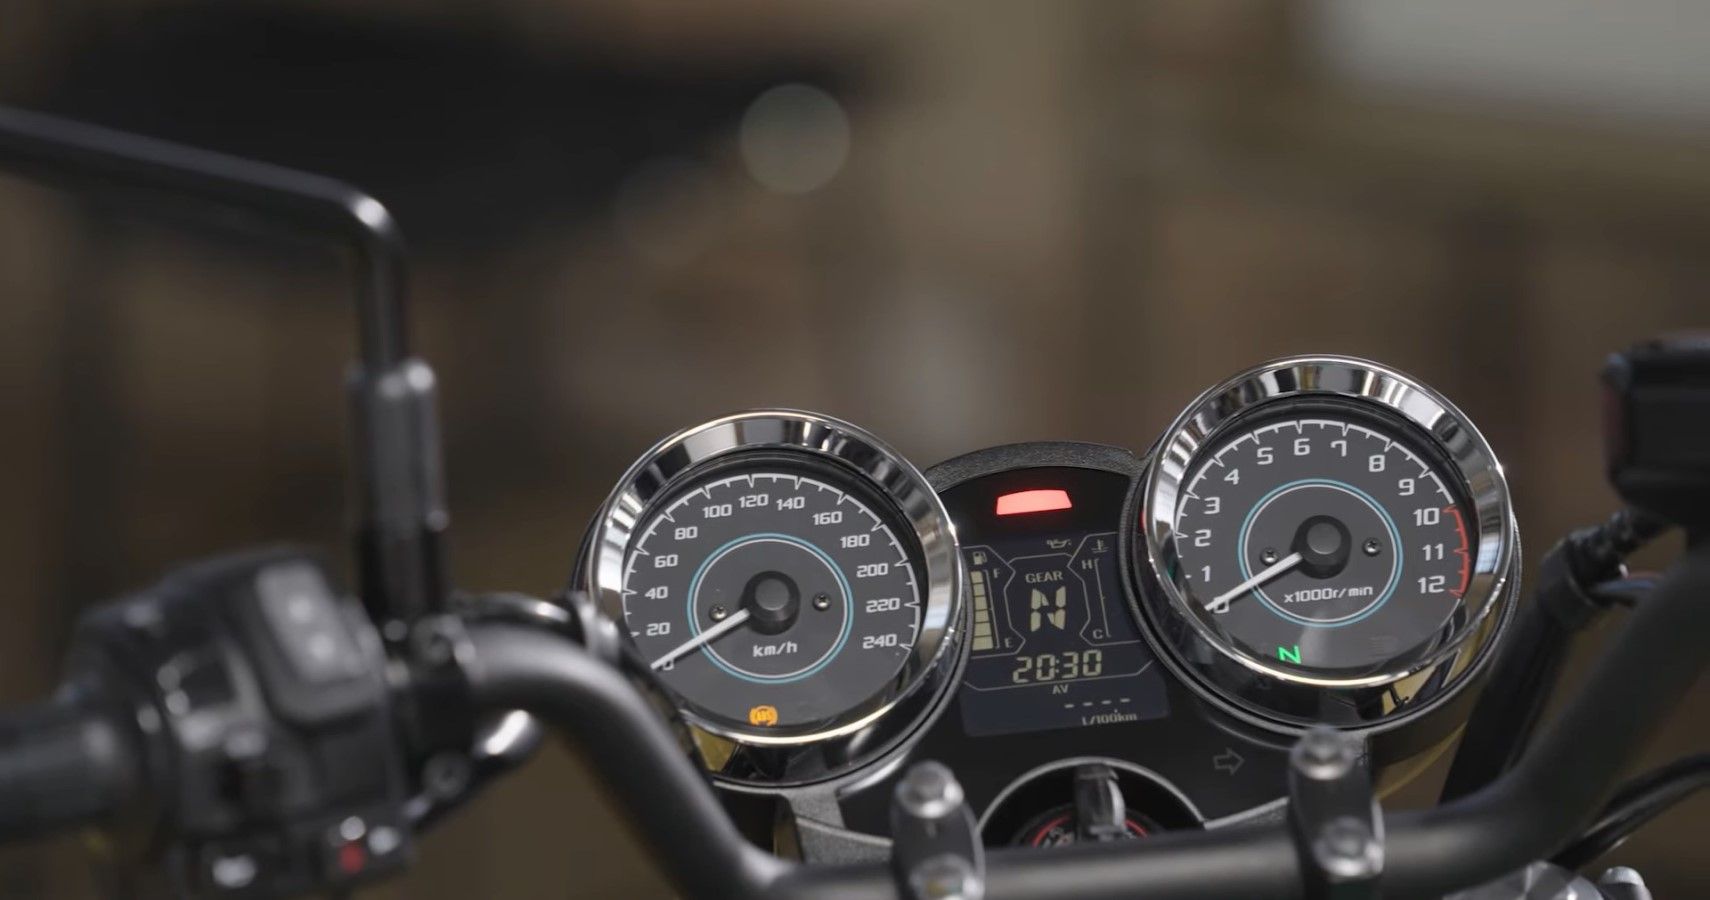 2022 Kawasaki Z650RS instrument cluster layout view